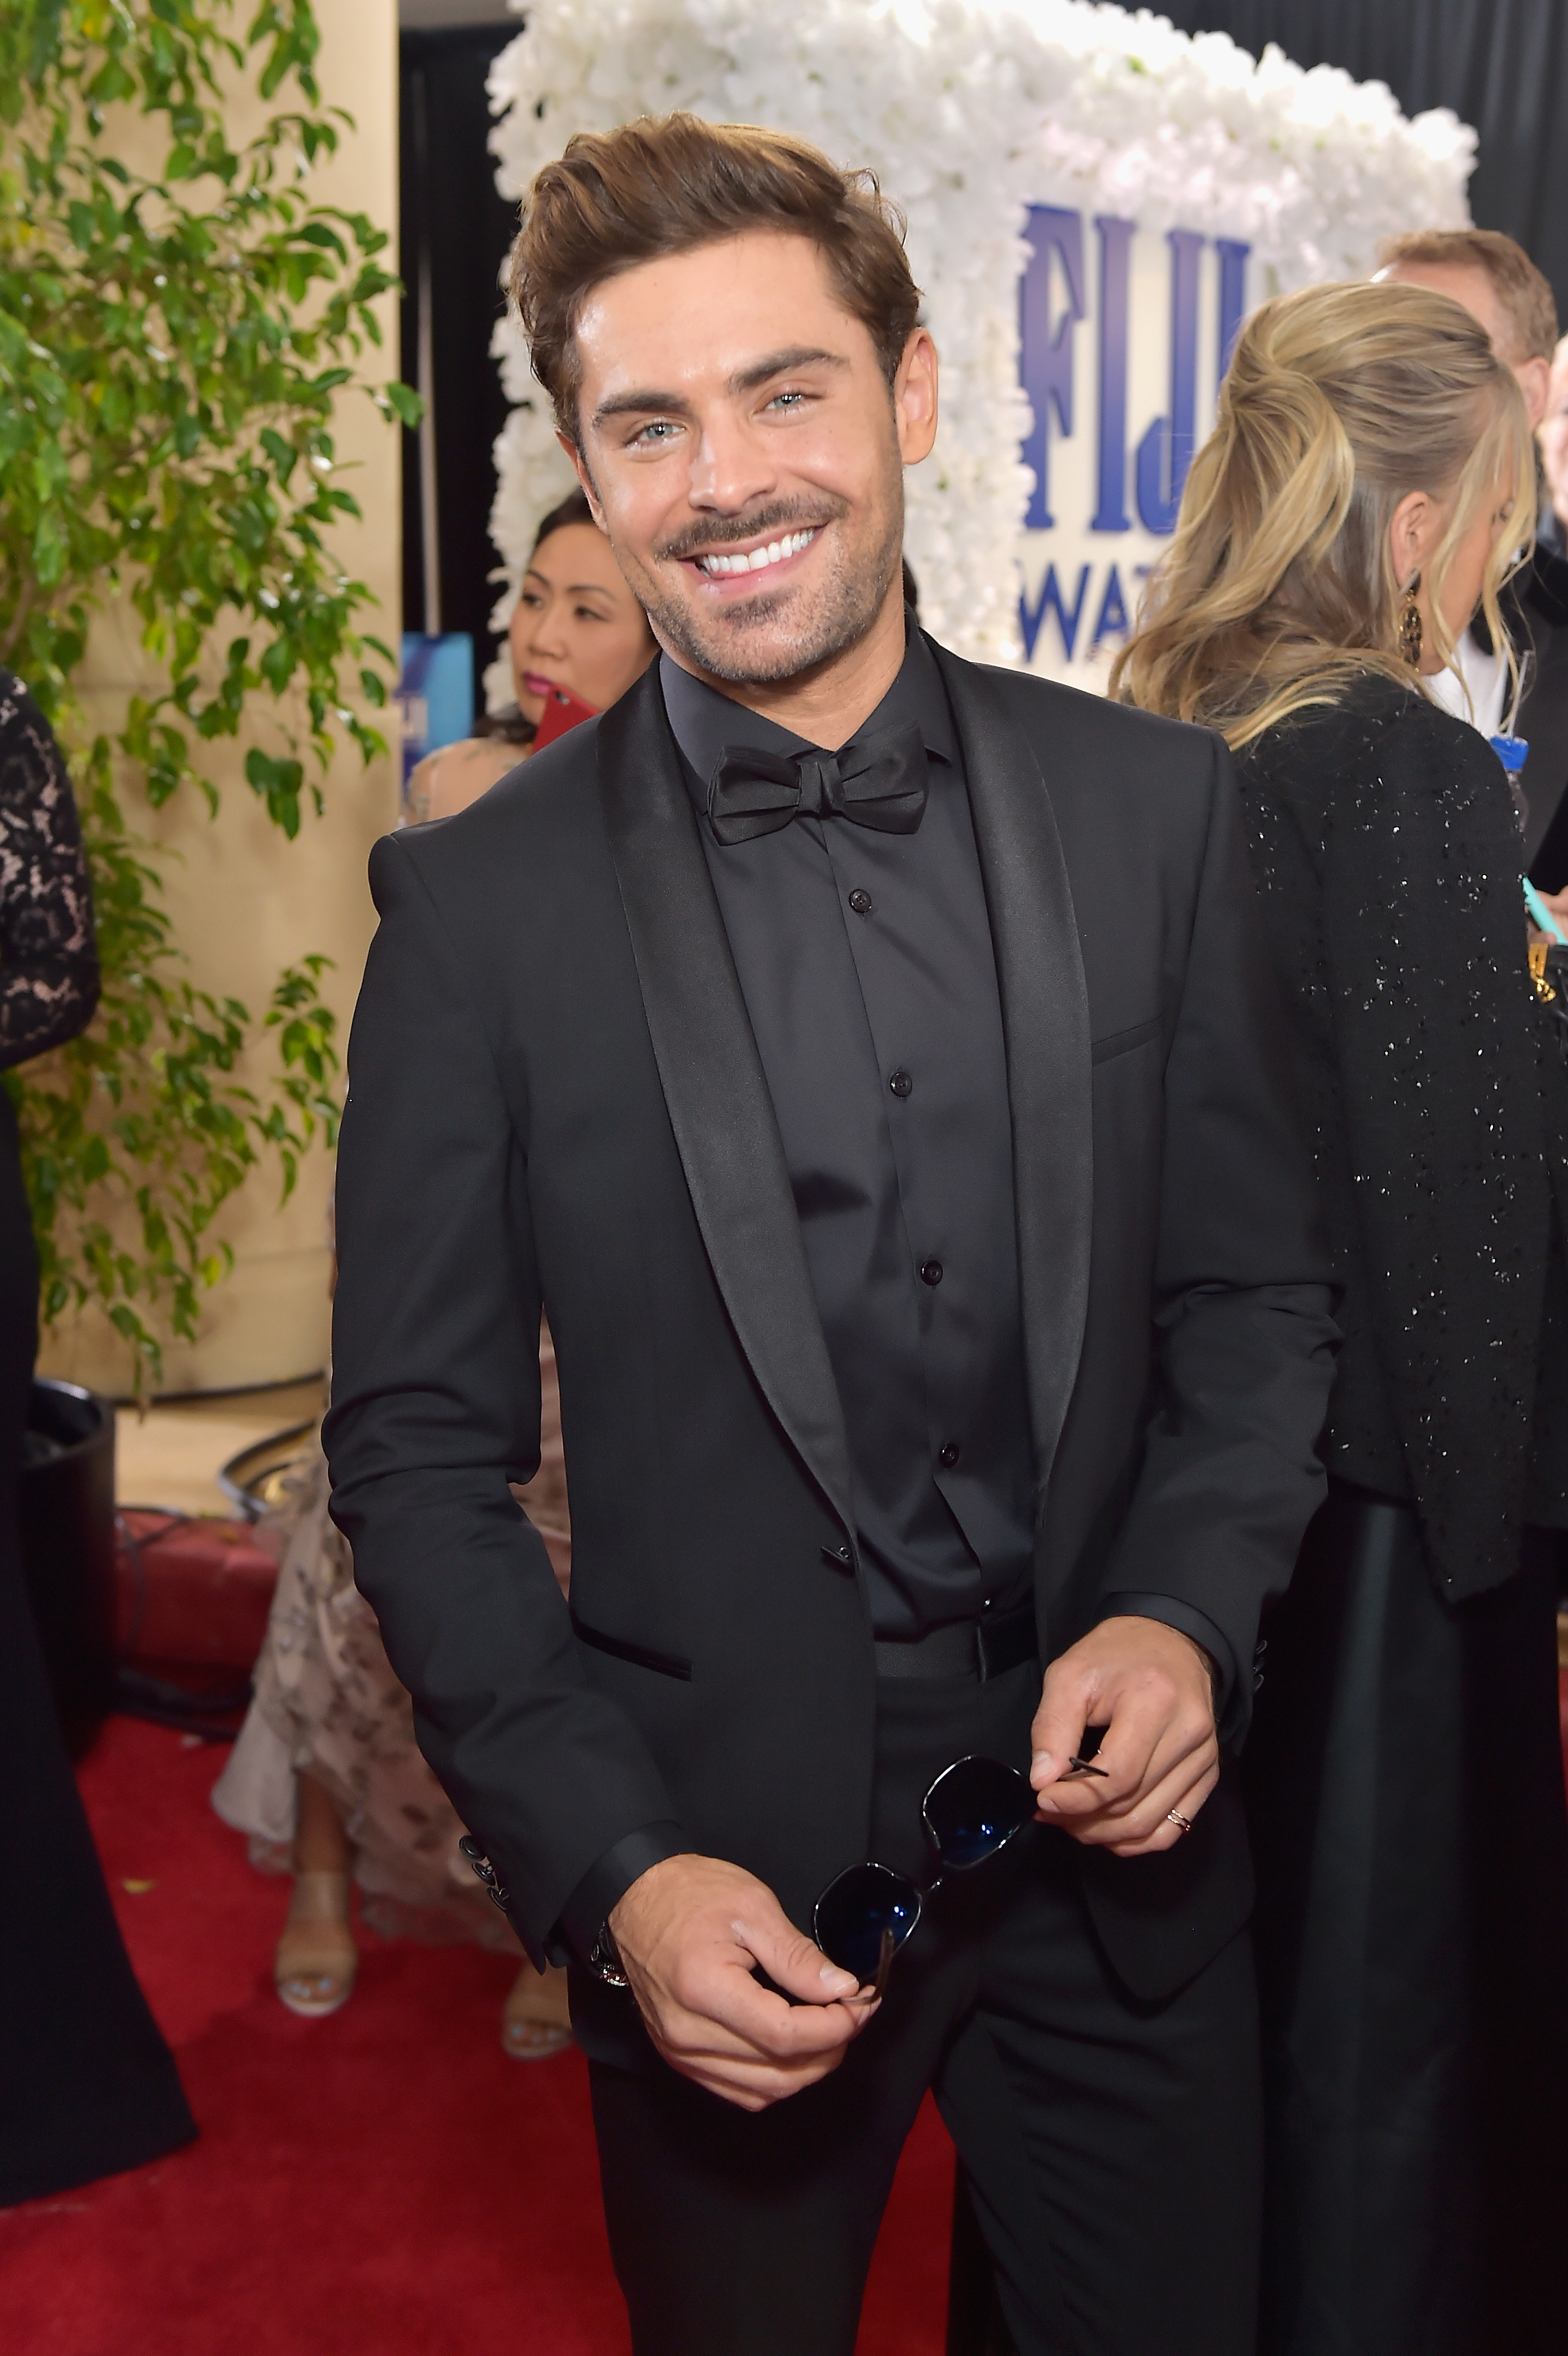 Actor Zac Efron attends The 75th Annual Golden Globe Awards at The Beverly Hilton Hotel on January 7, 2018 in Beverly Hills, California